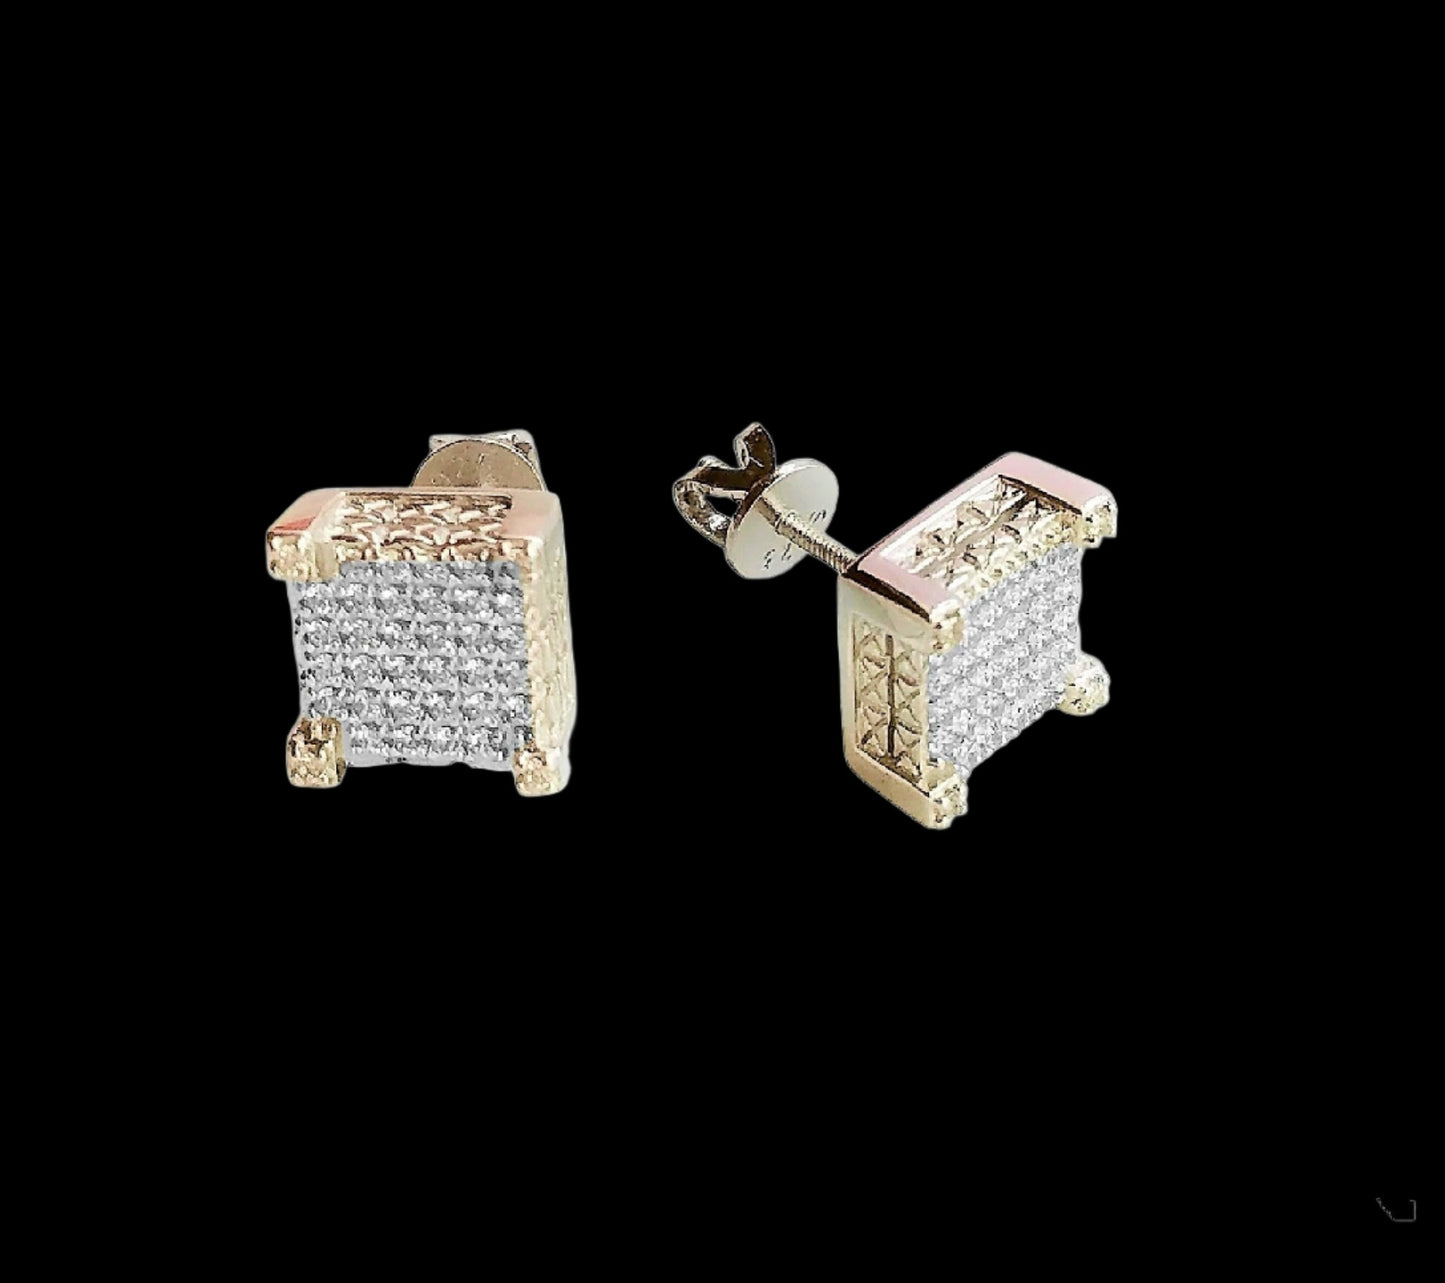 EG141 1 Inch Micro Pave Stud Square 4-Prong Earrings